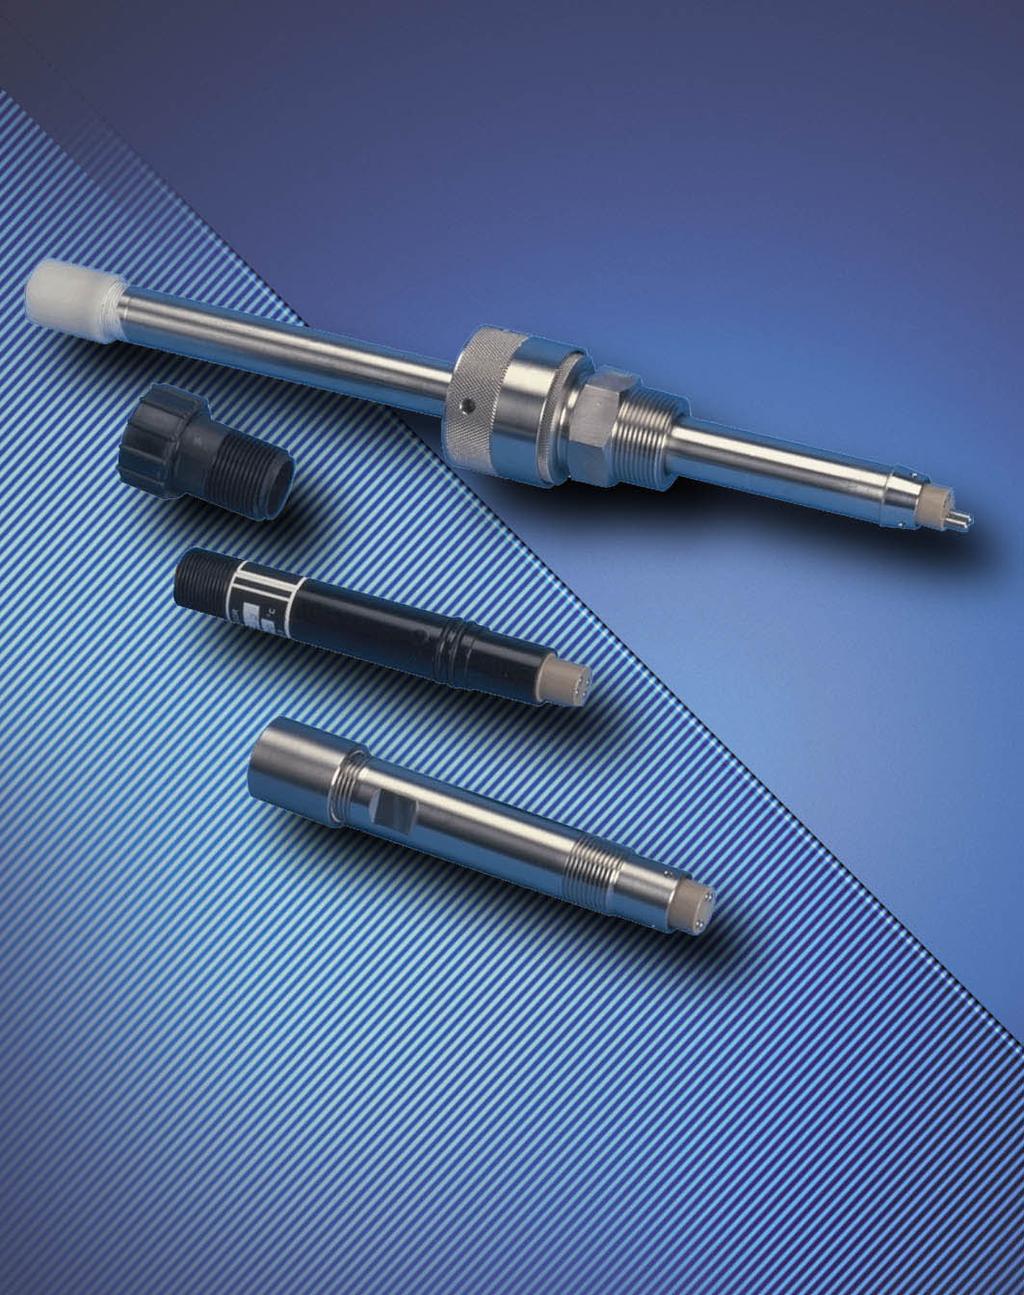 Data Sheet Analytical Instruments Four-Electrode Conductivity Sensors for Process Monitoring Model TB4 Four-electrode measurement: Increases accuracy, stability, flexibility, and security Highest